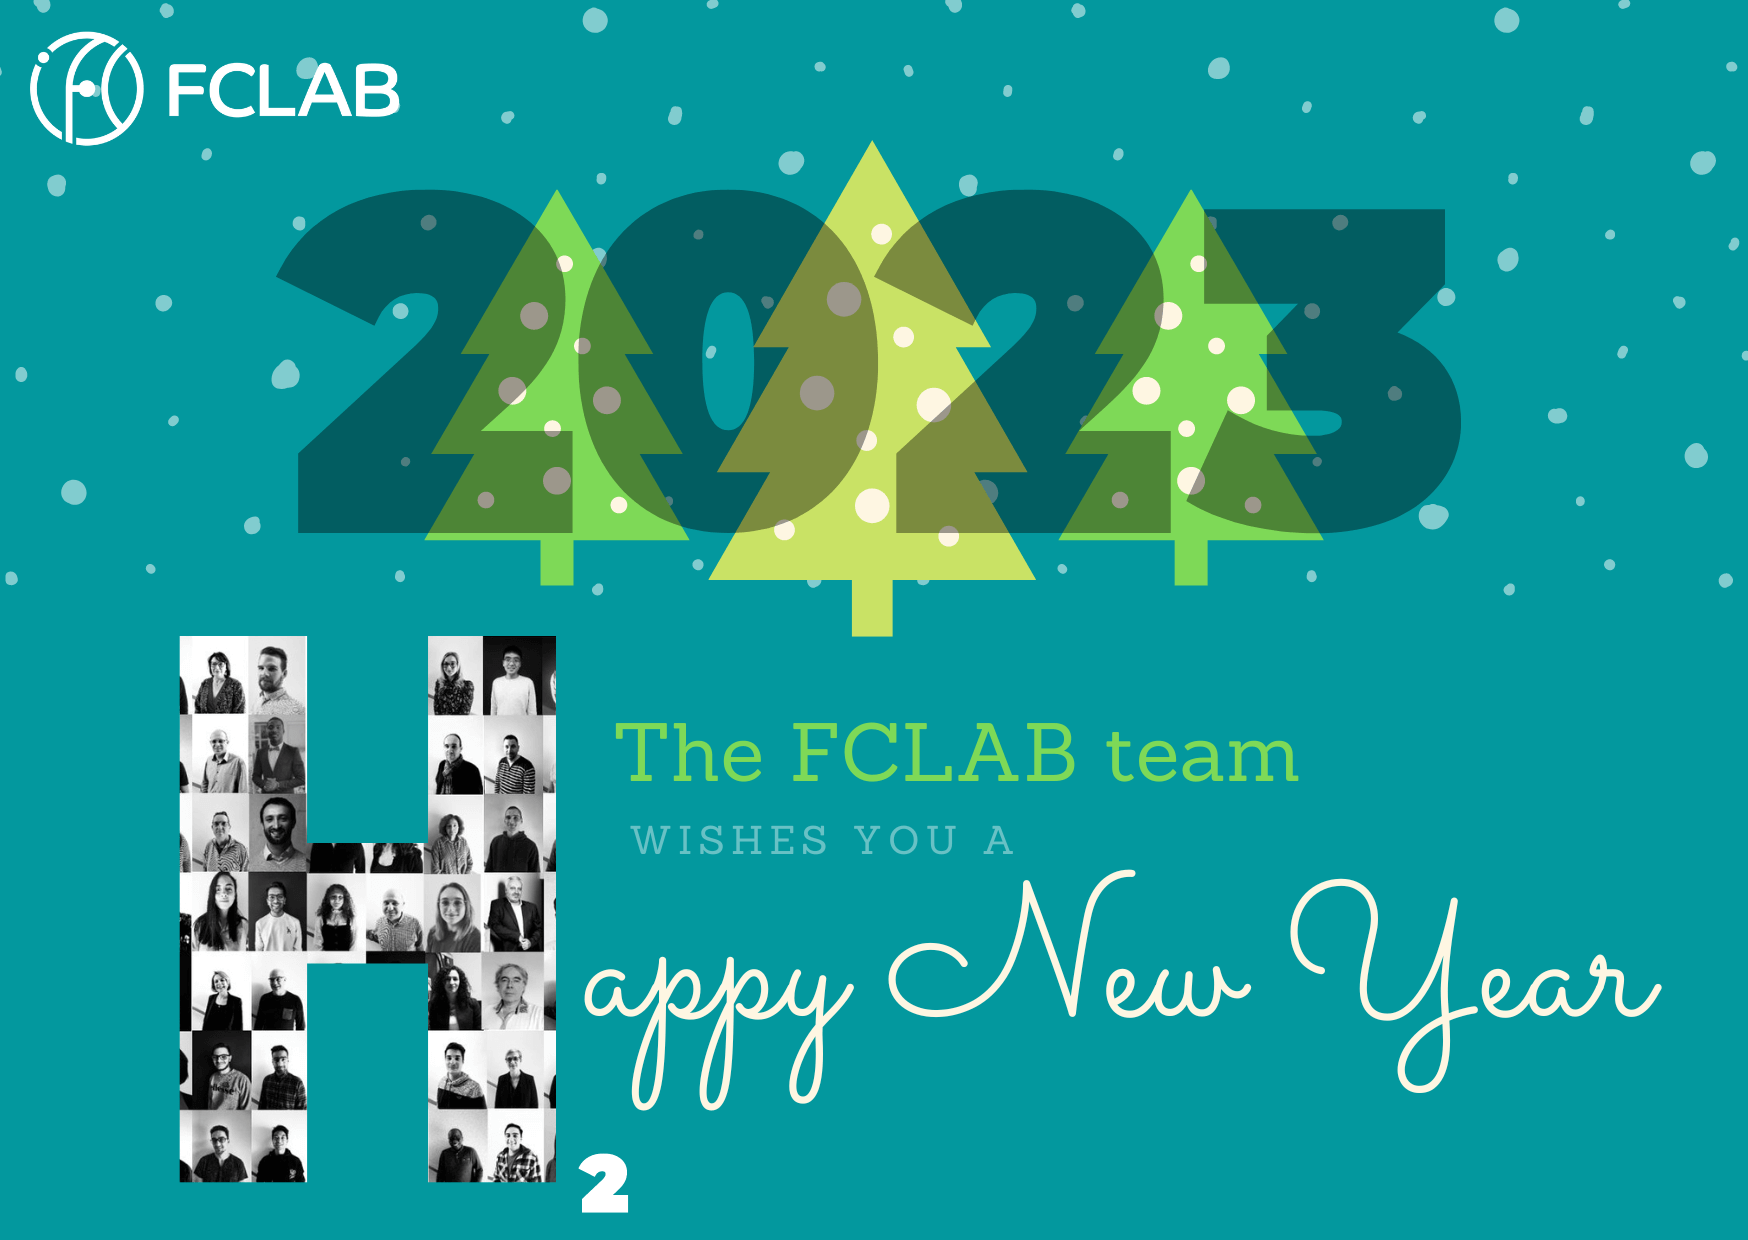 Merry Christmas and Happy New Year 2023 from the FCLAB team!